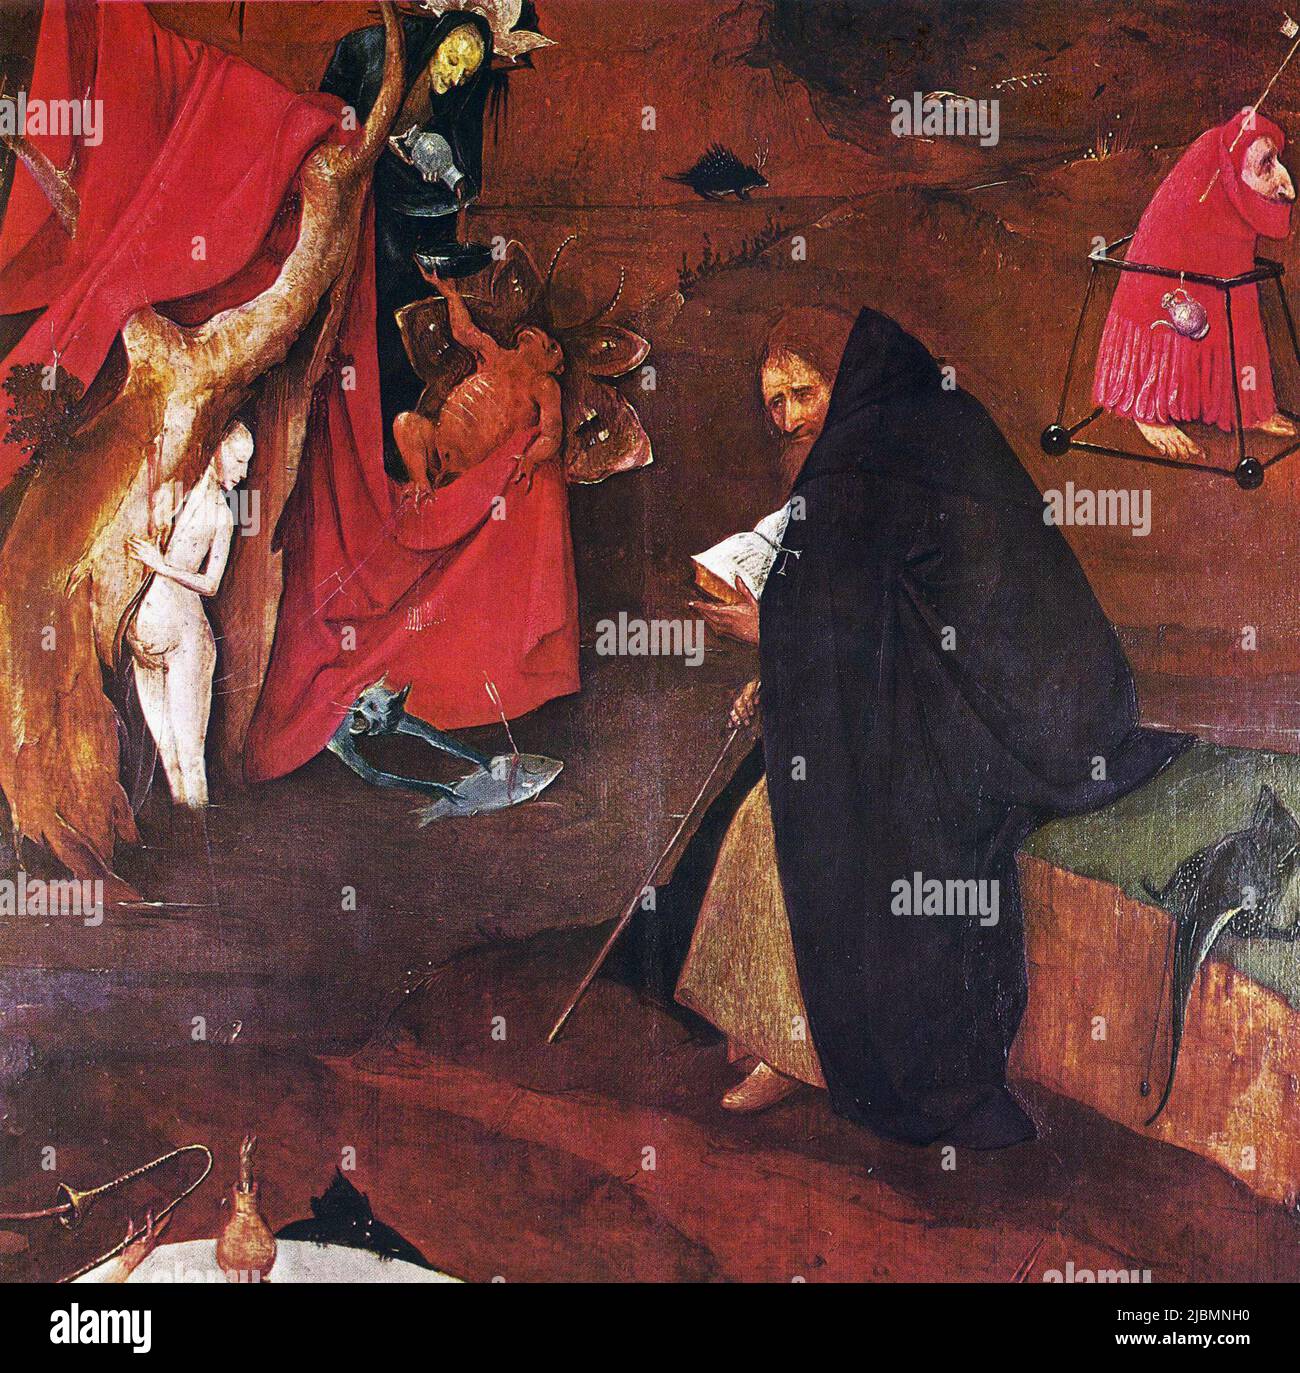 'The Temptation of St.Anthony', detail from the right wing of the triptych by Hieronymus Bosch. Lisbon, Museu Nacional de Arte Antiga. Stock Photo